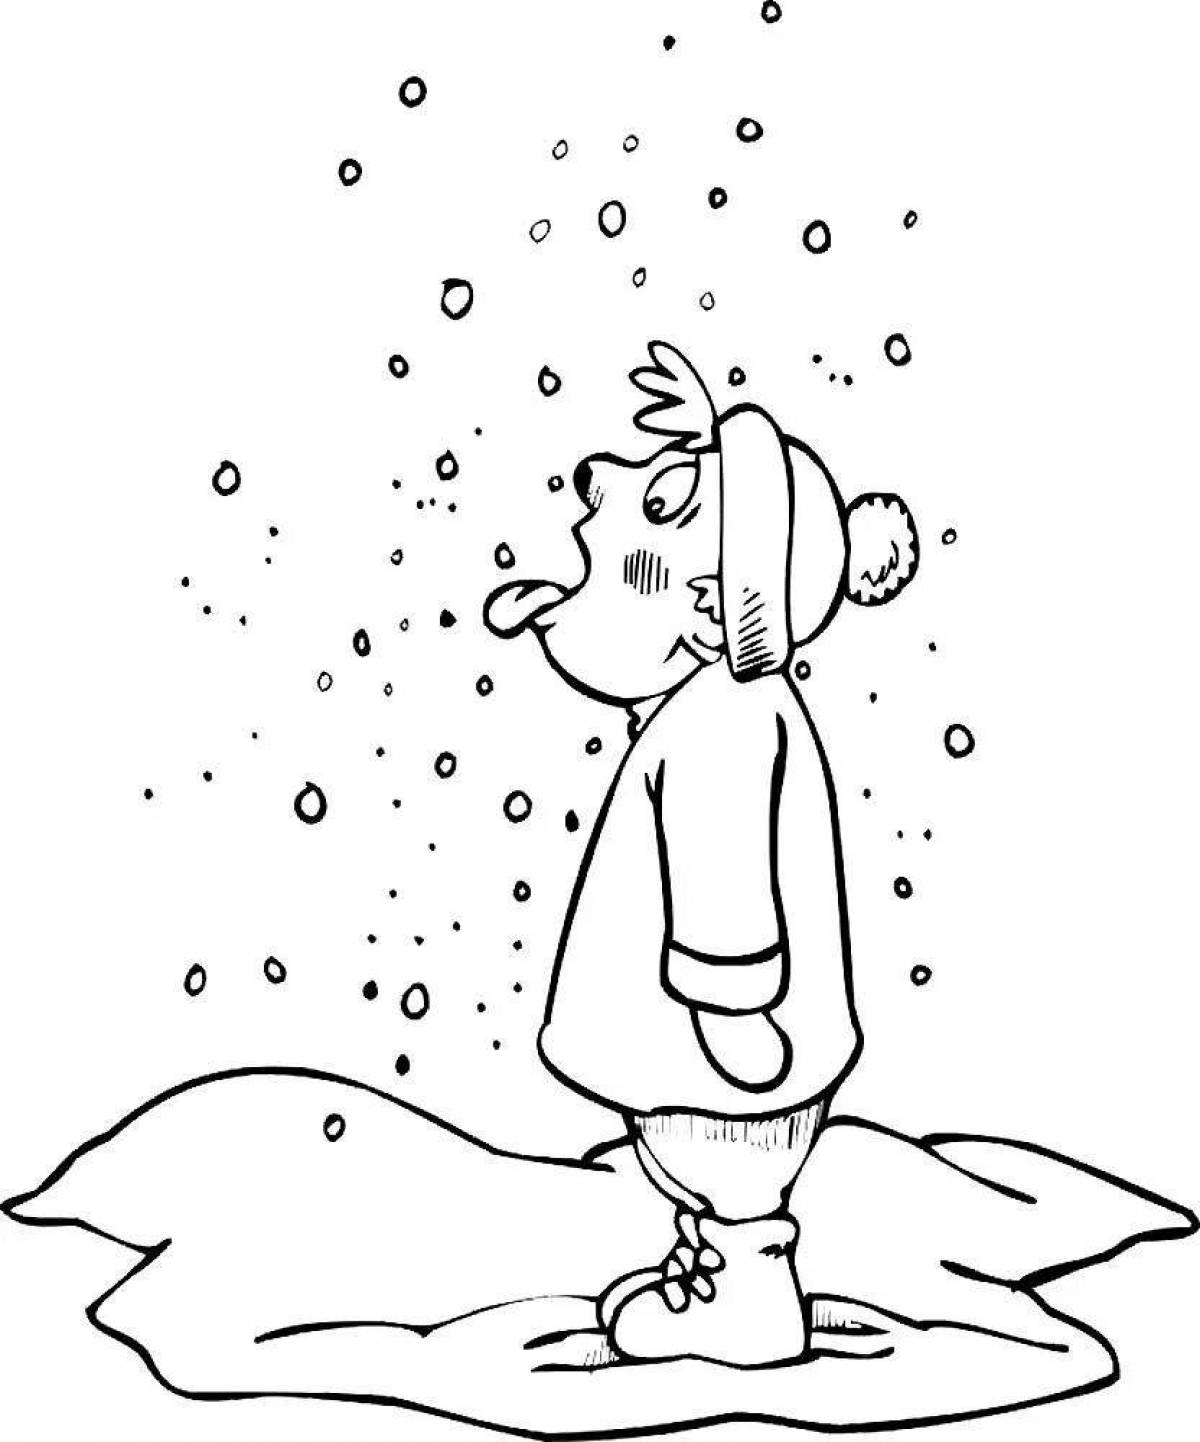 Fairy Snowfall Coloring Page for Toddlers